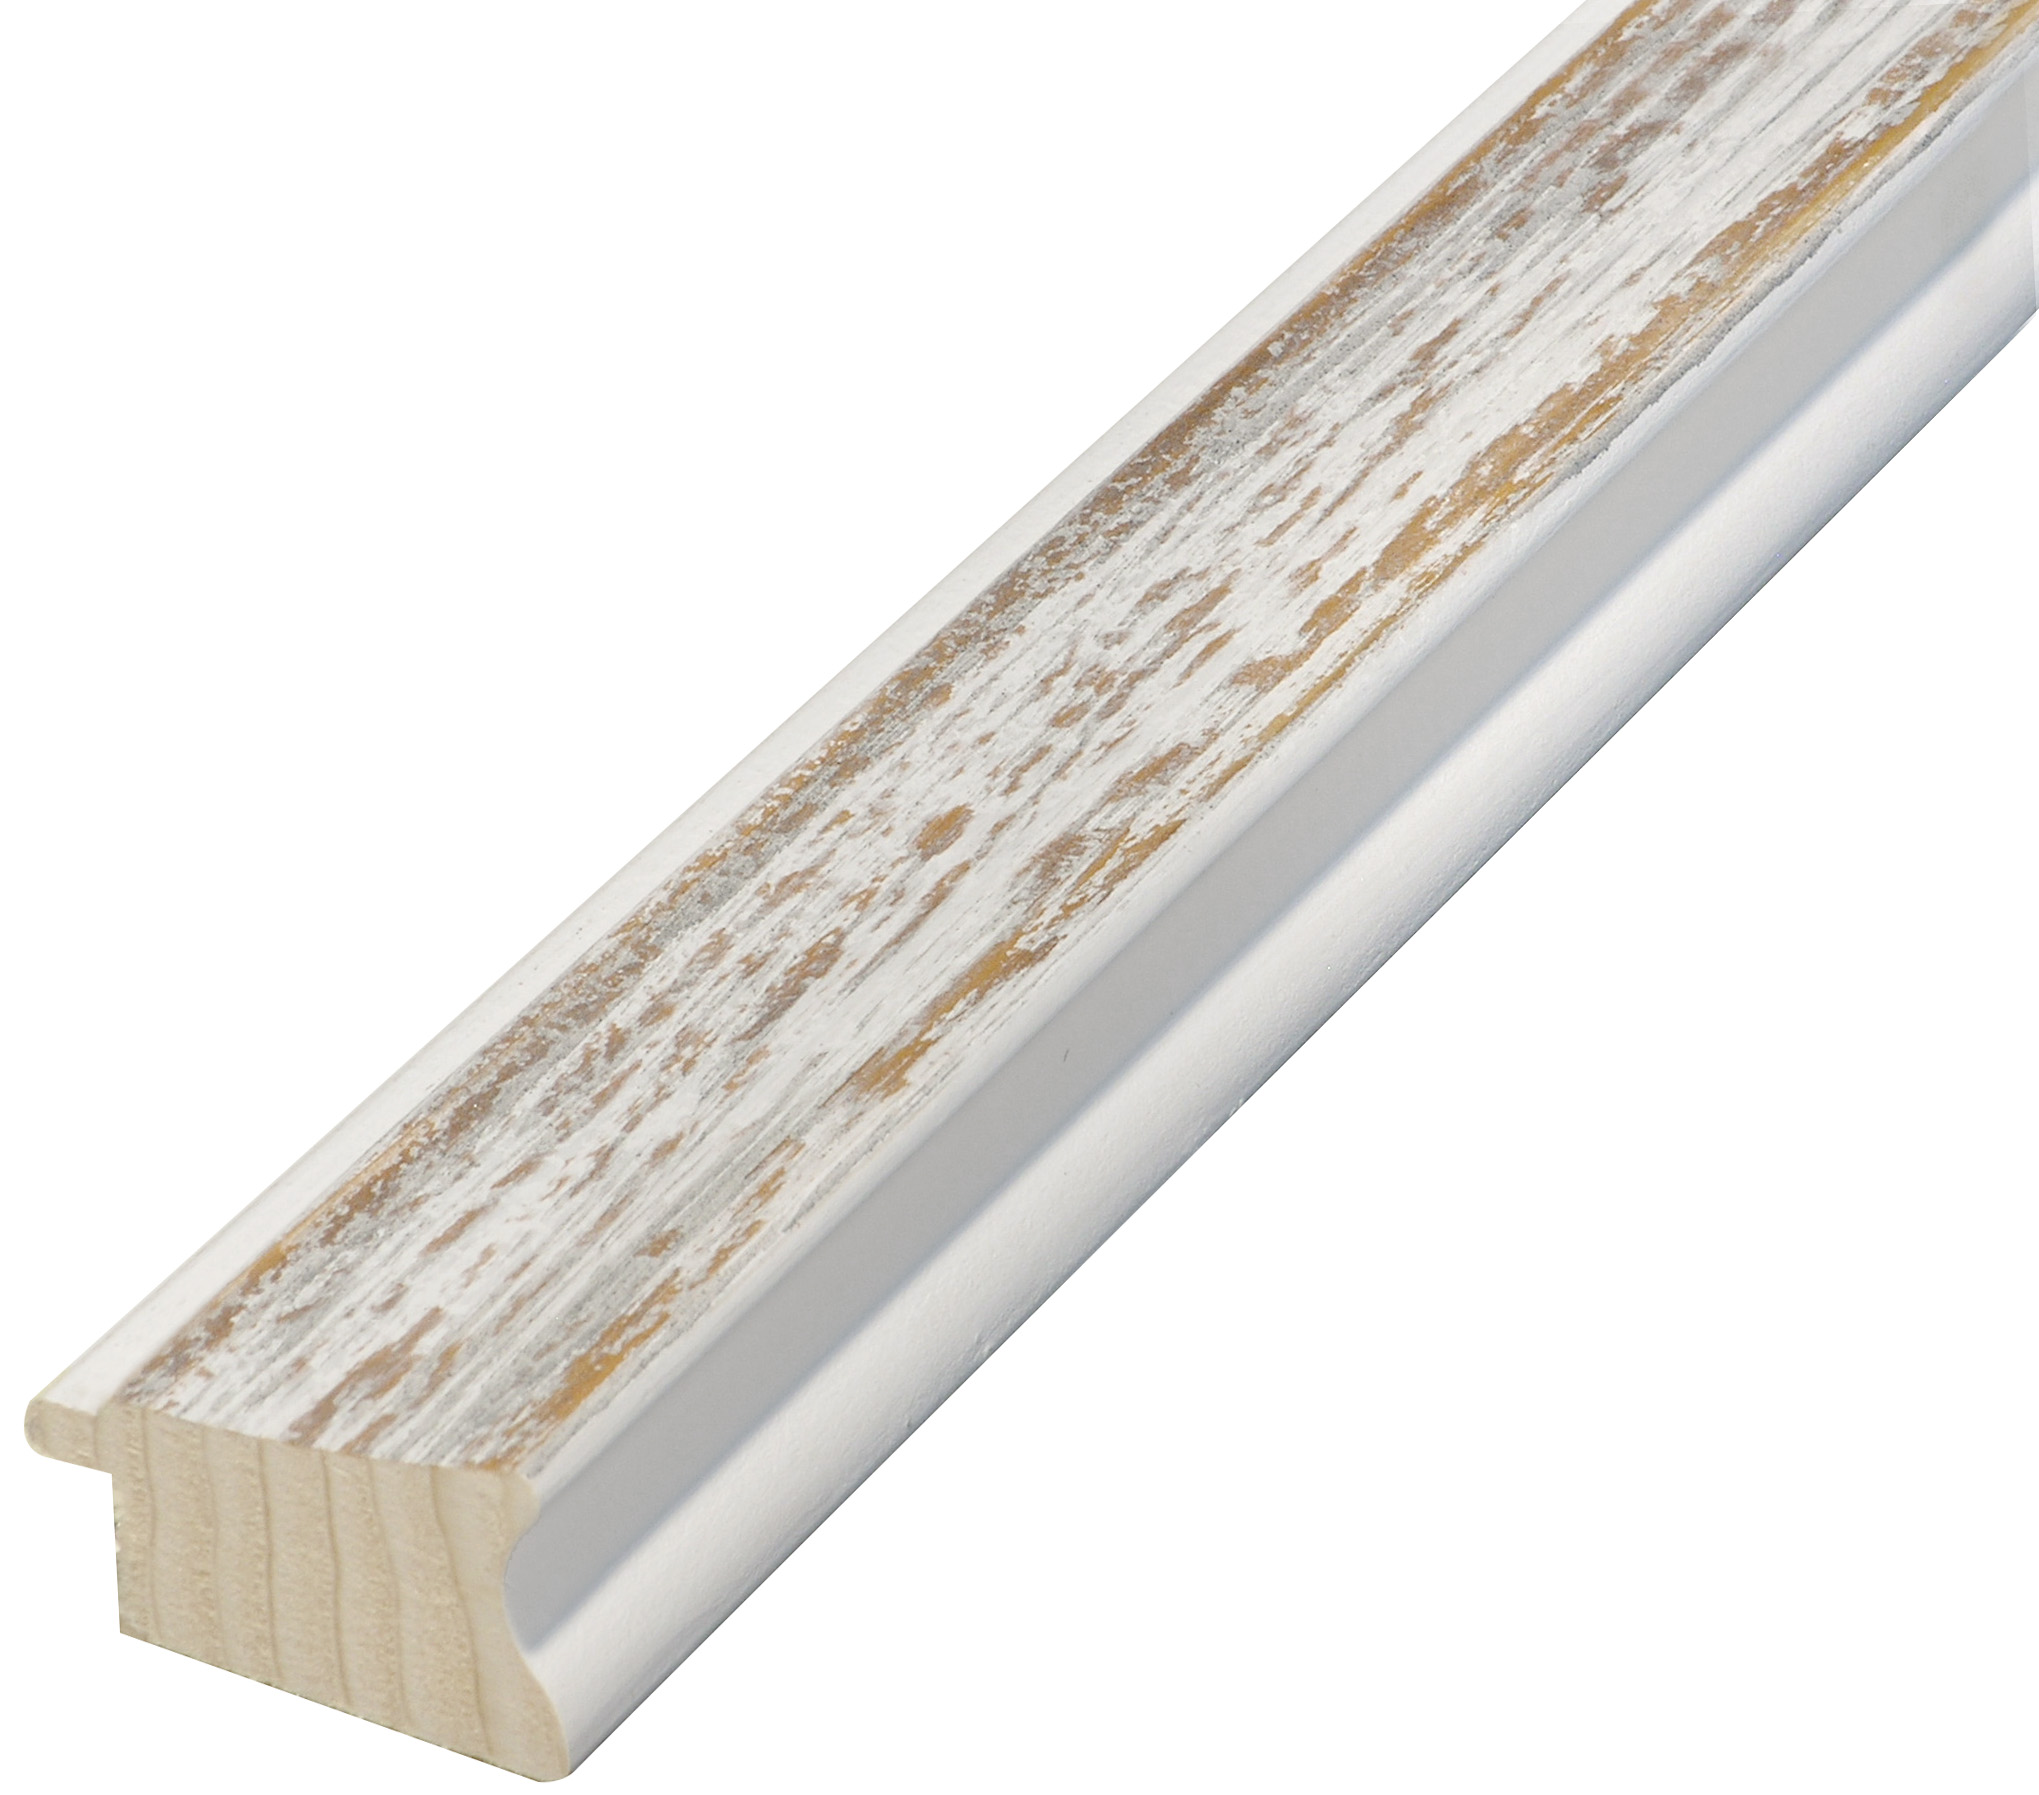 Moulding finger-jointed fir, width 40 mm, distressed white-brown